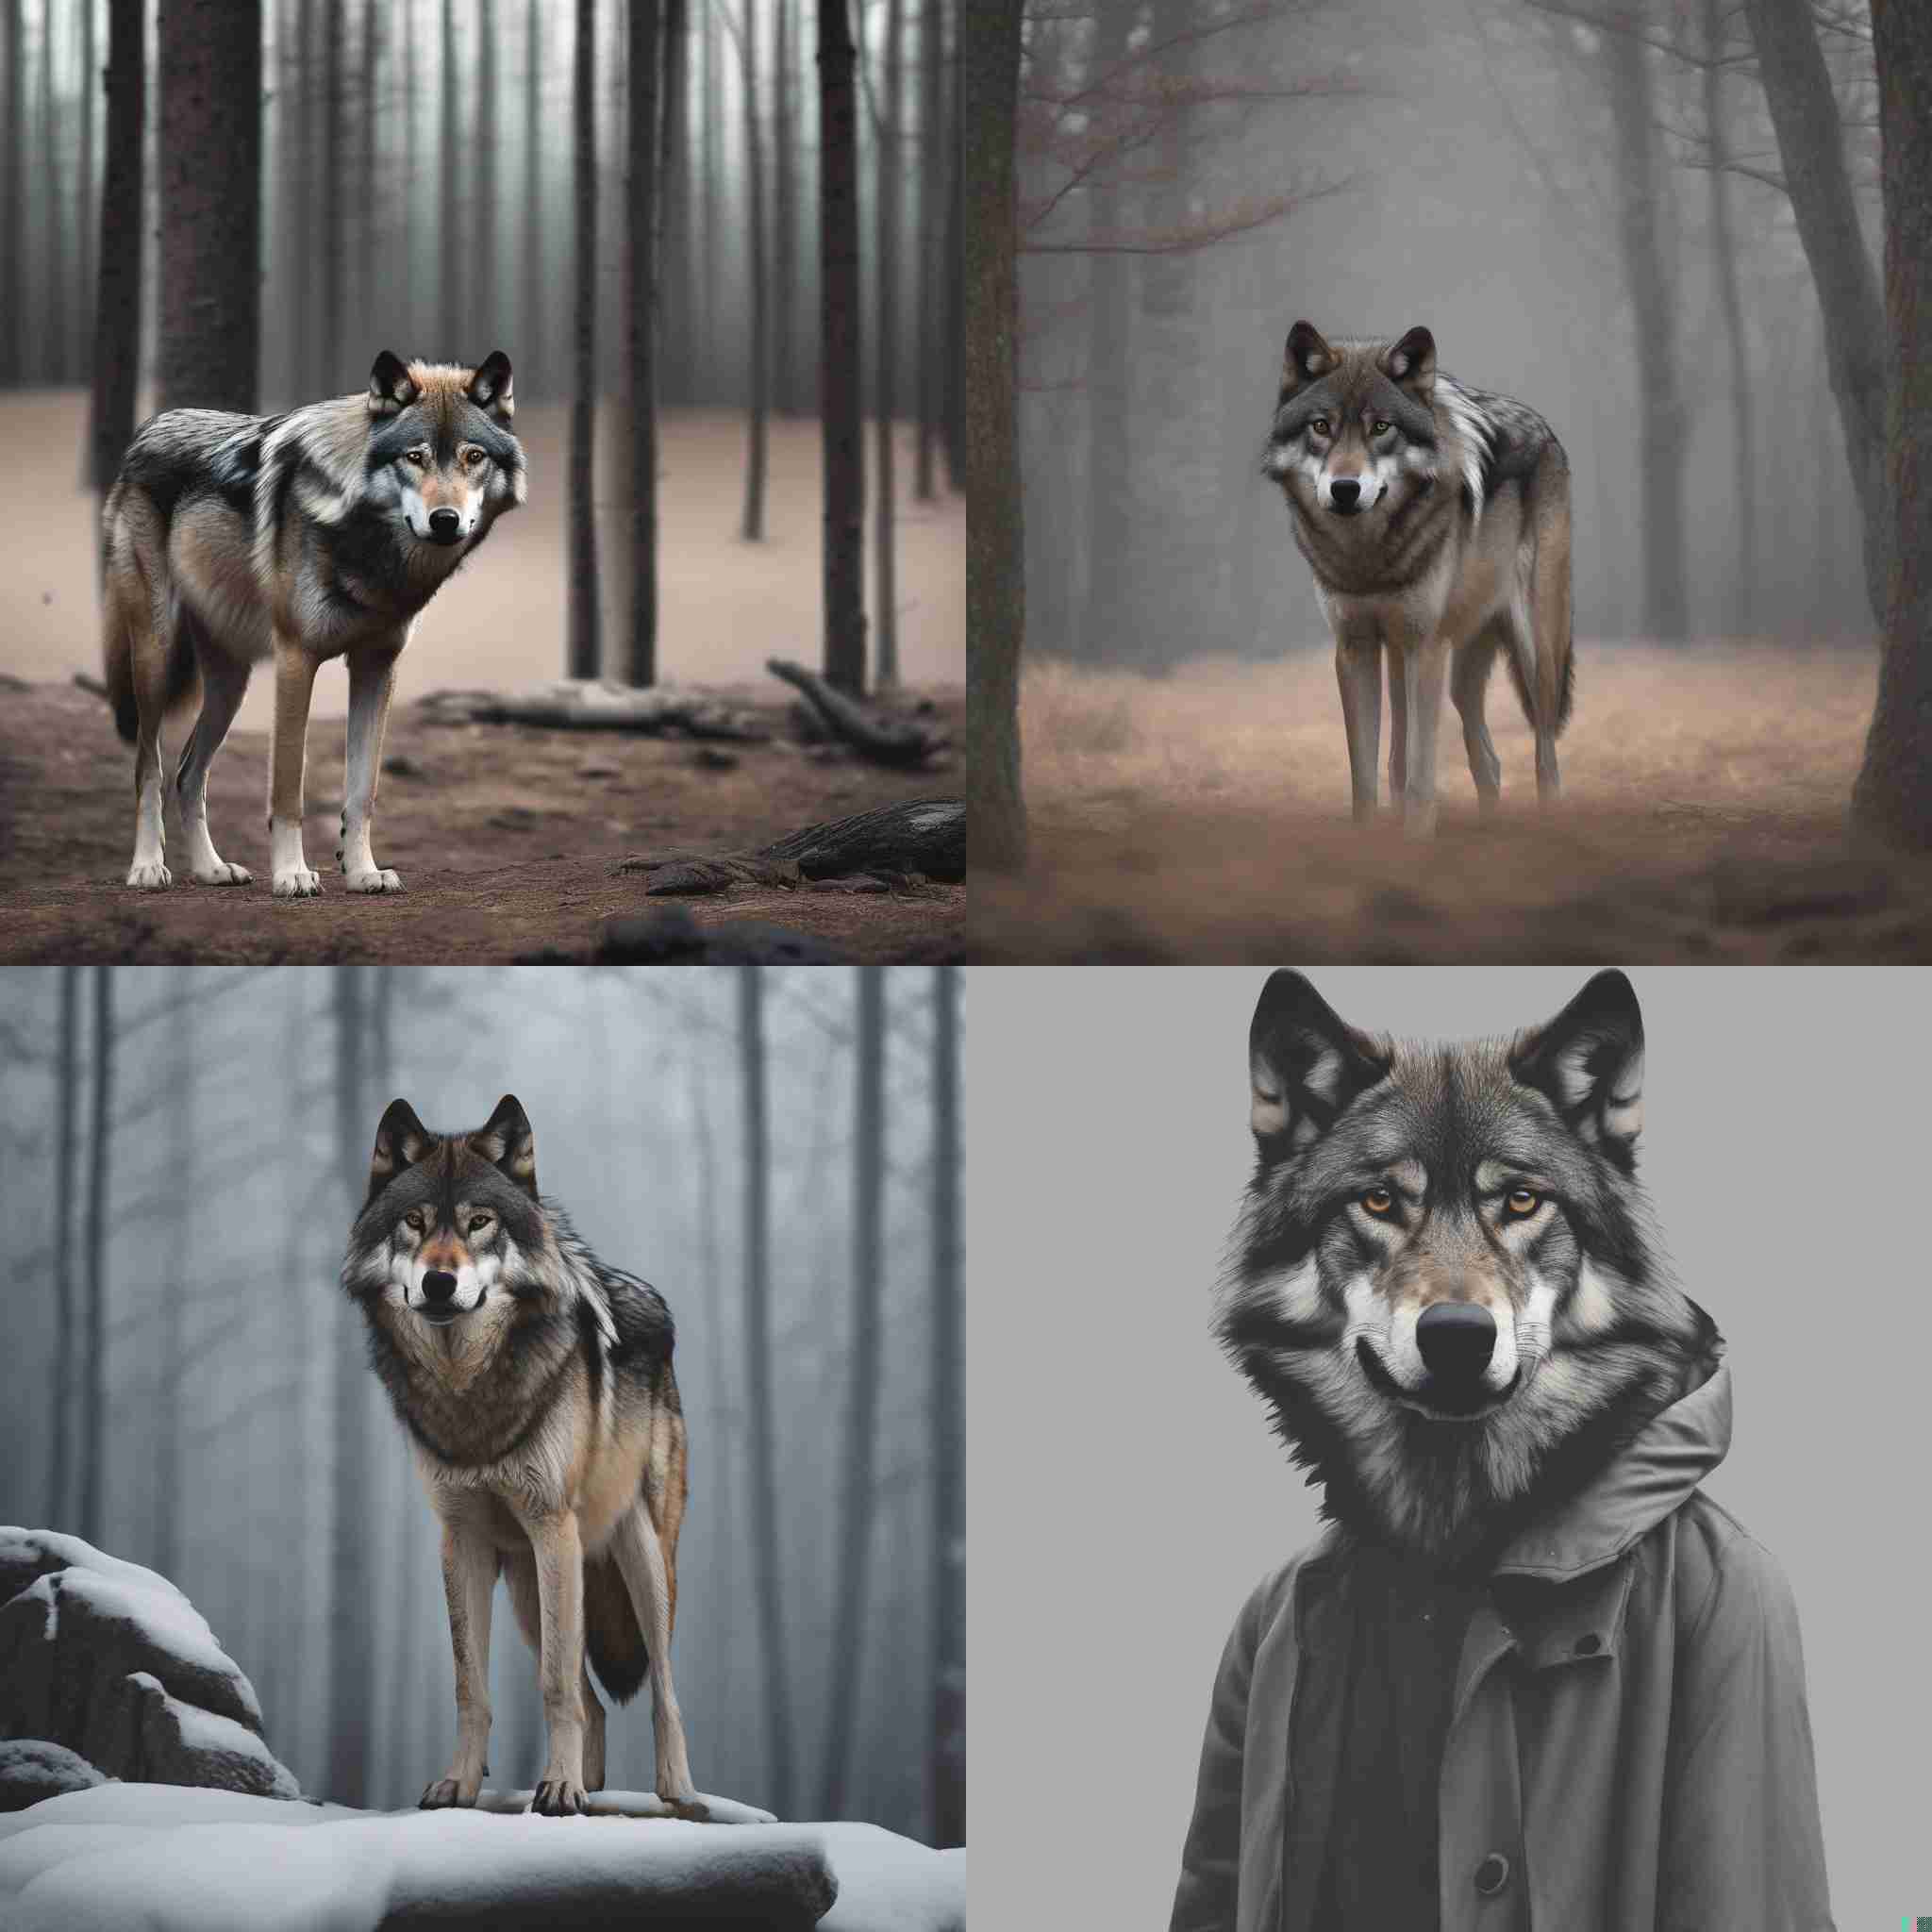 A lone wolf standing in silence